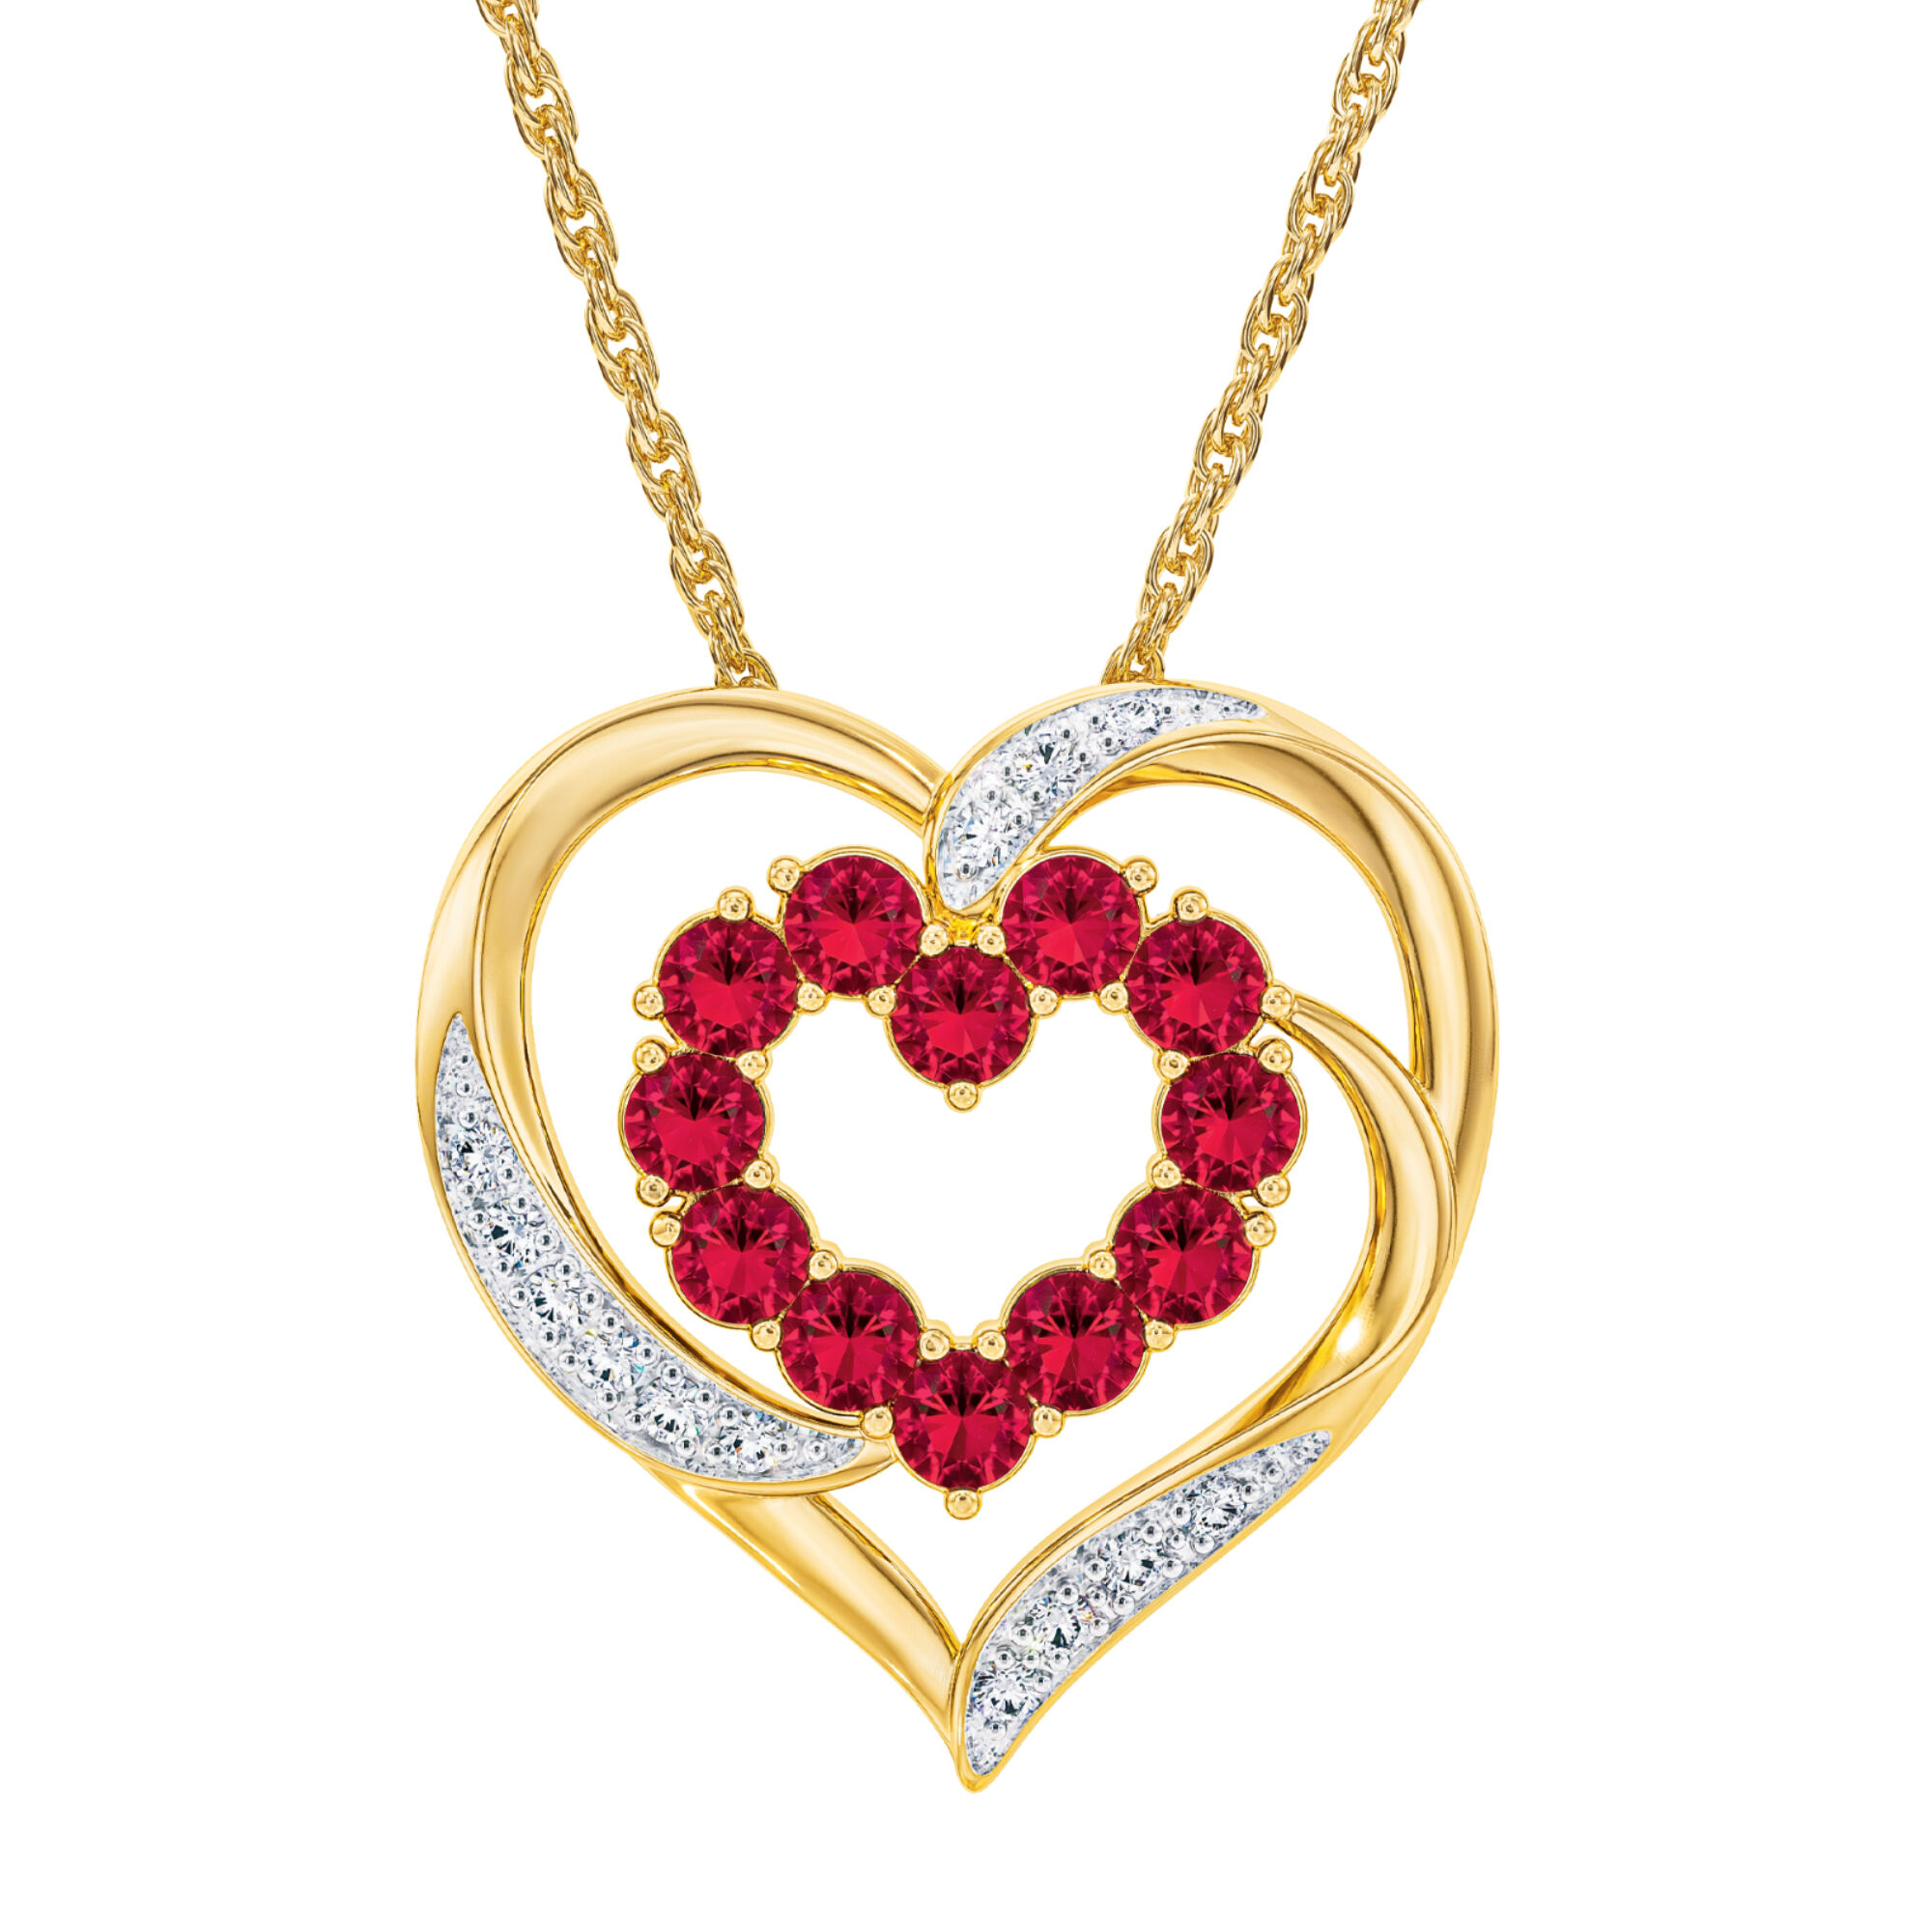 Hearts Afire Diamond Necklace with FREE Matching Earrings 10810 0017 b pendant